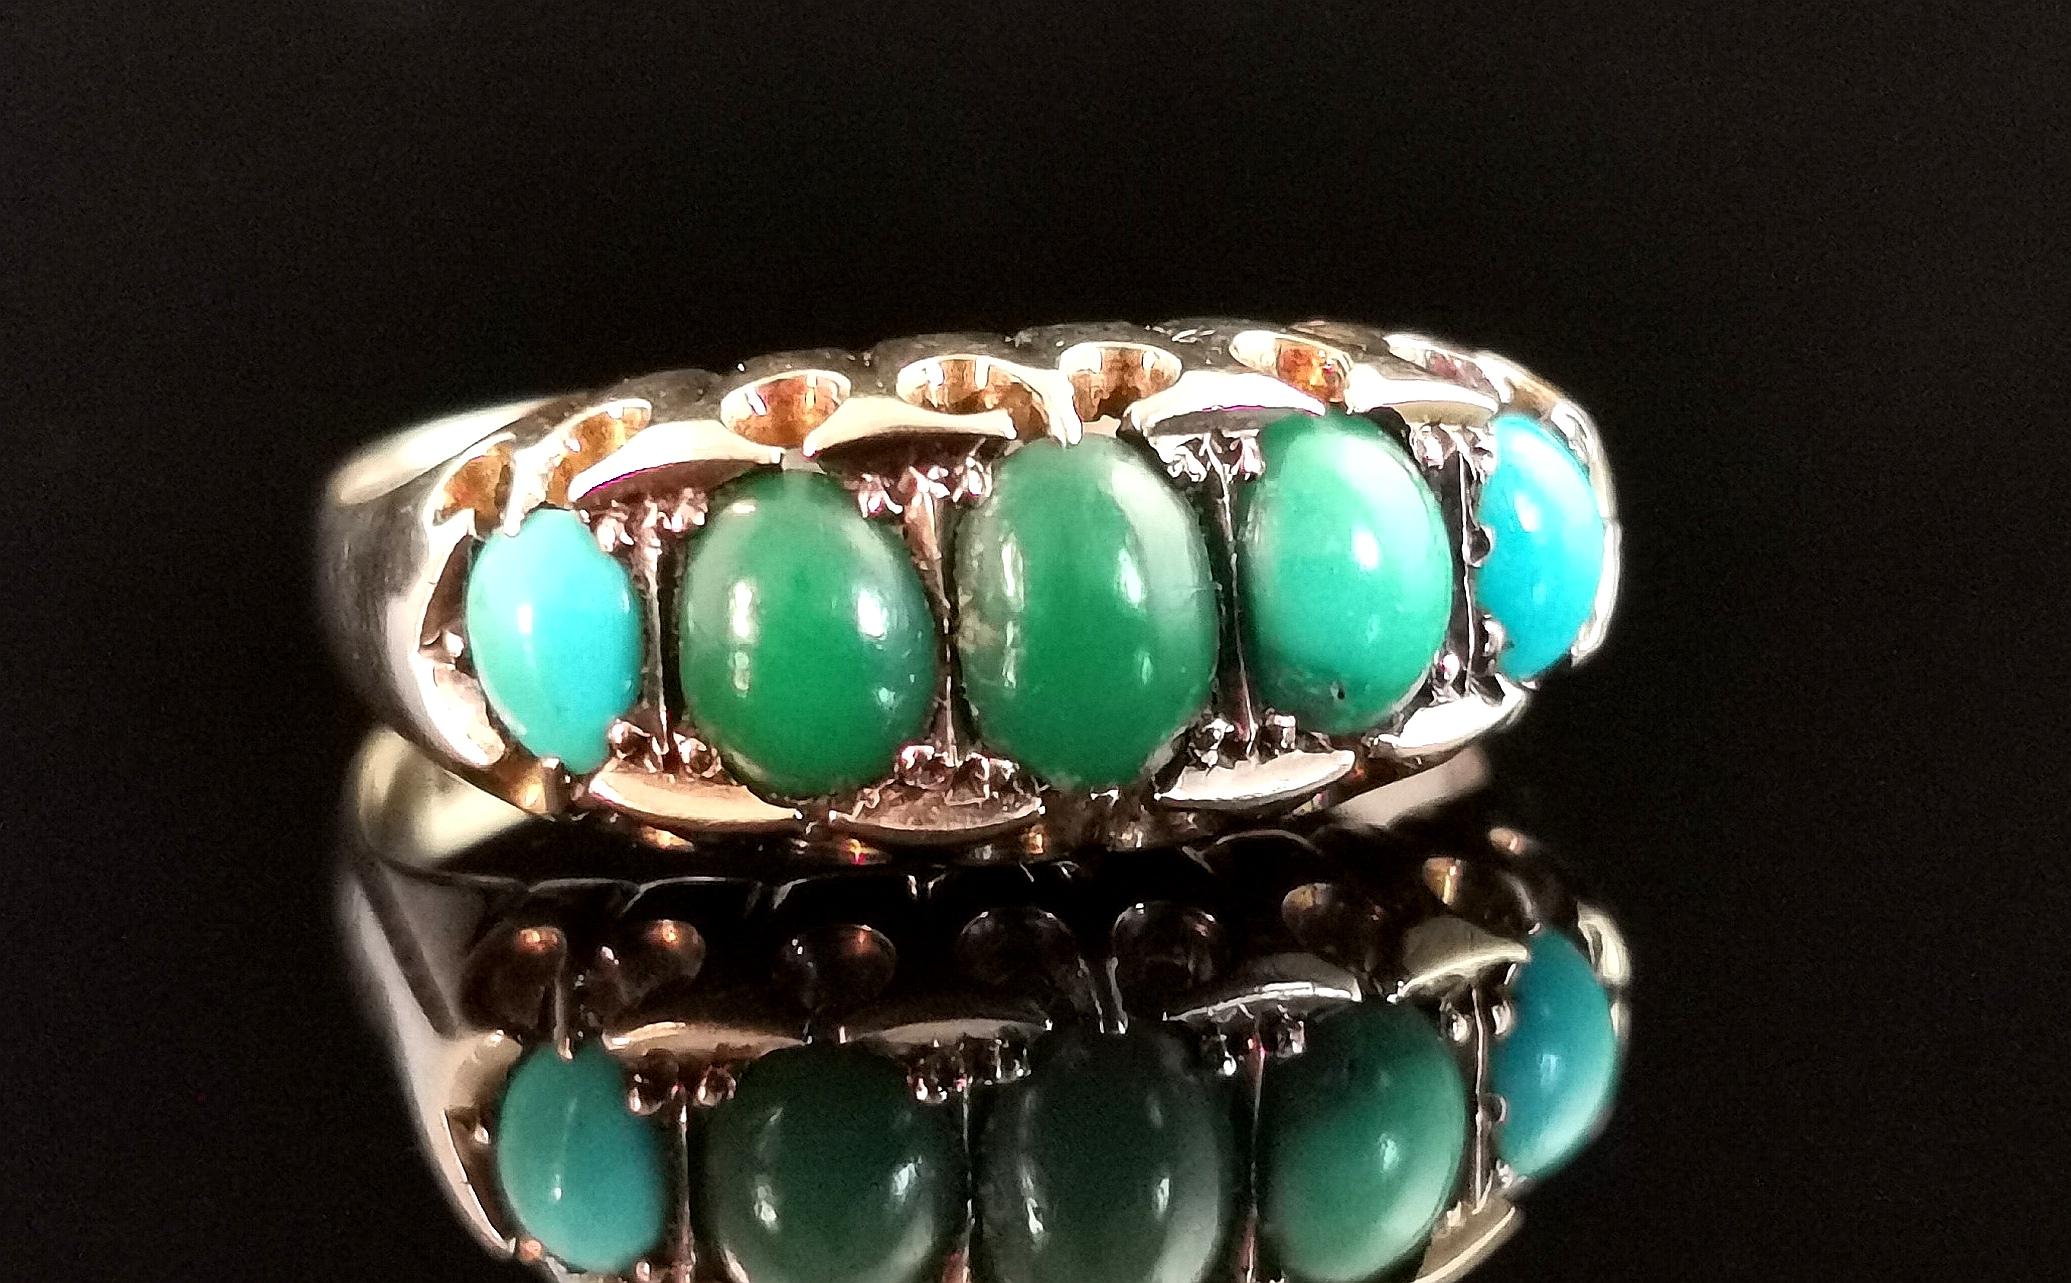 A gorgeous antique variegated Turquoise five stone ring.

This superb ring has five rich green turquoise cabochons set to the front, graduating in size from the largest centre stone.

It is crafted in a rich lightly rosey 9ct gold with a boat head